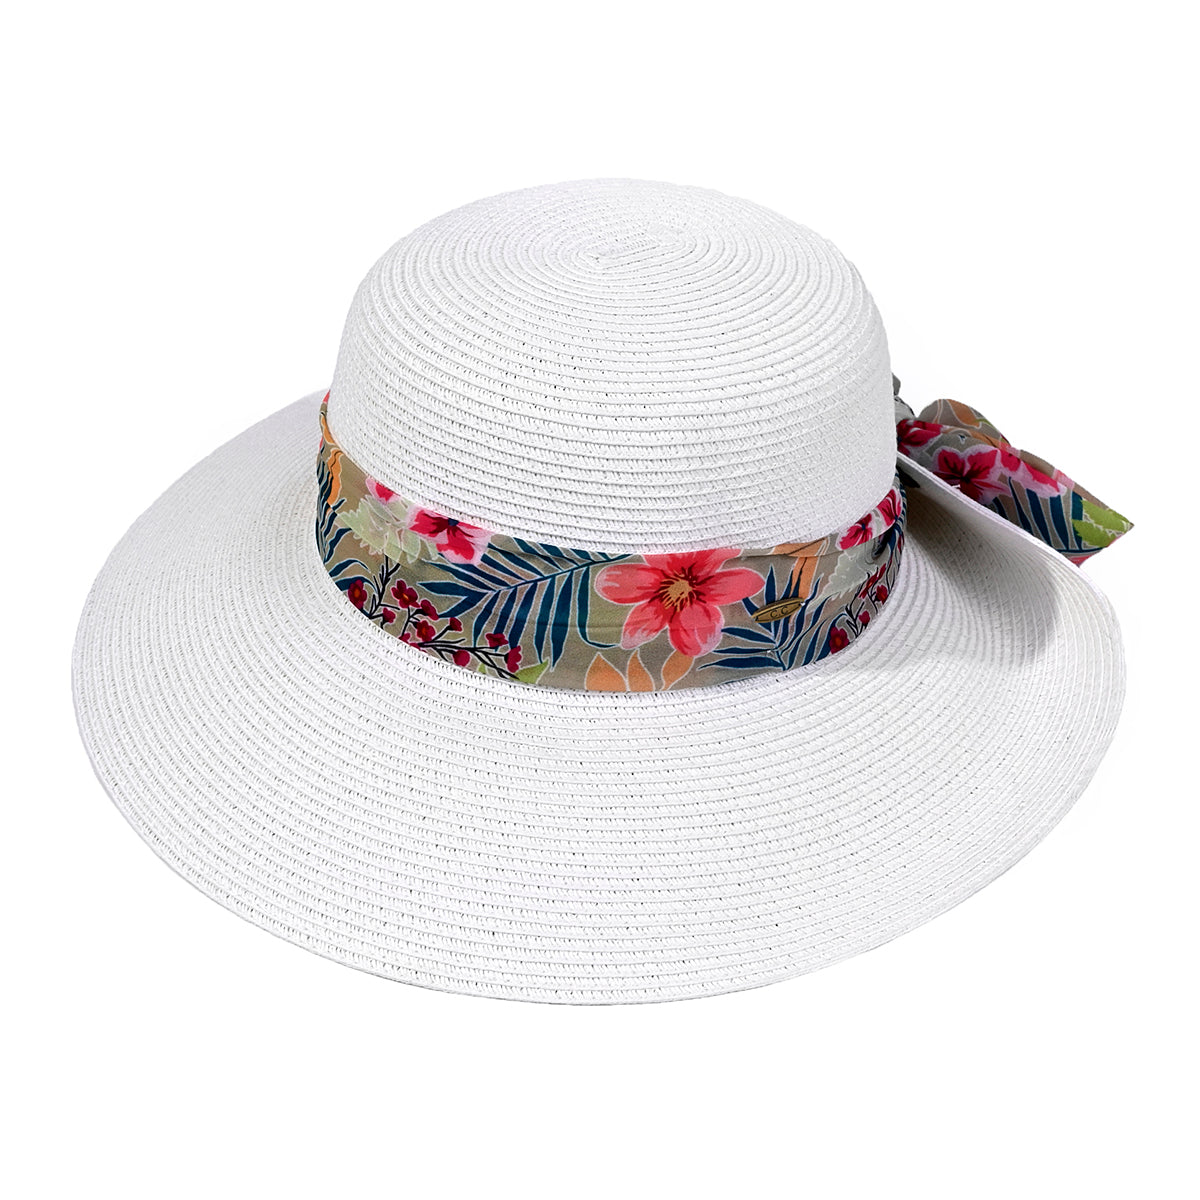 Wide Brim Sunhat with Tropical Print Rolled Up Details